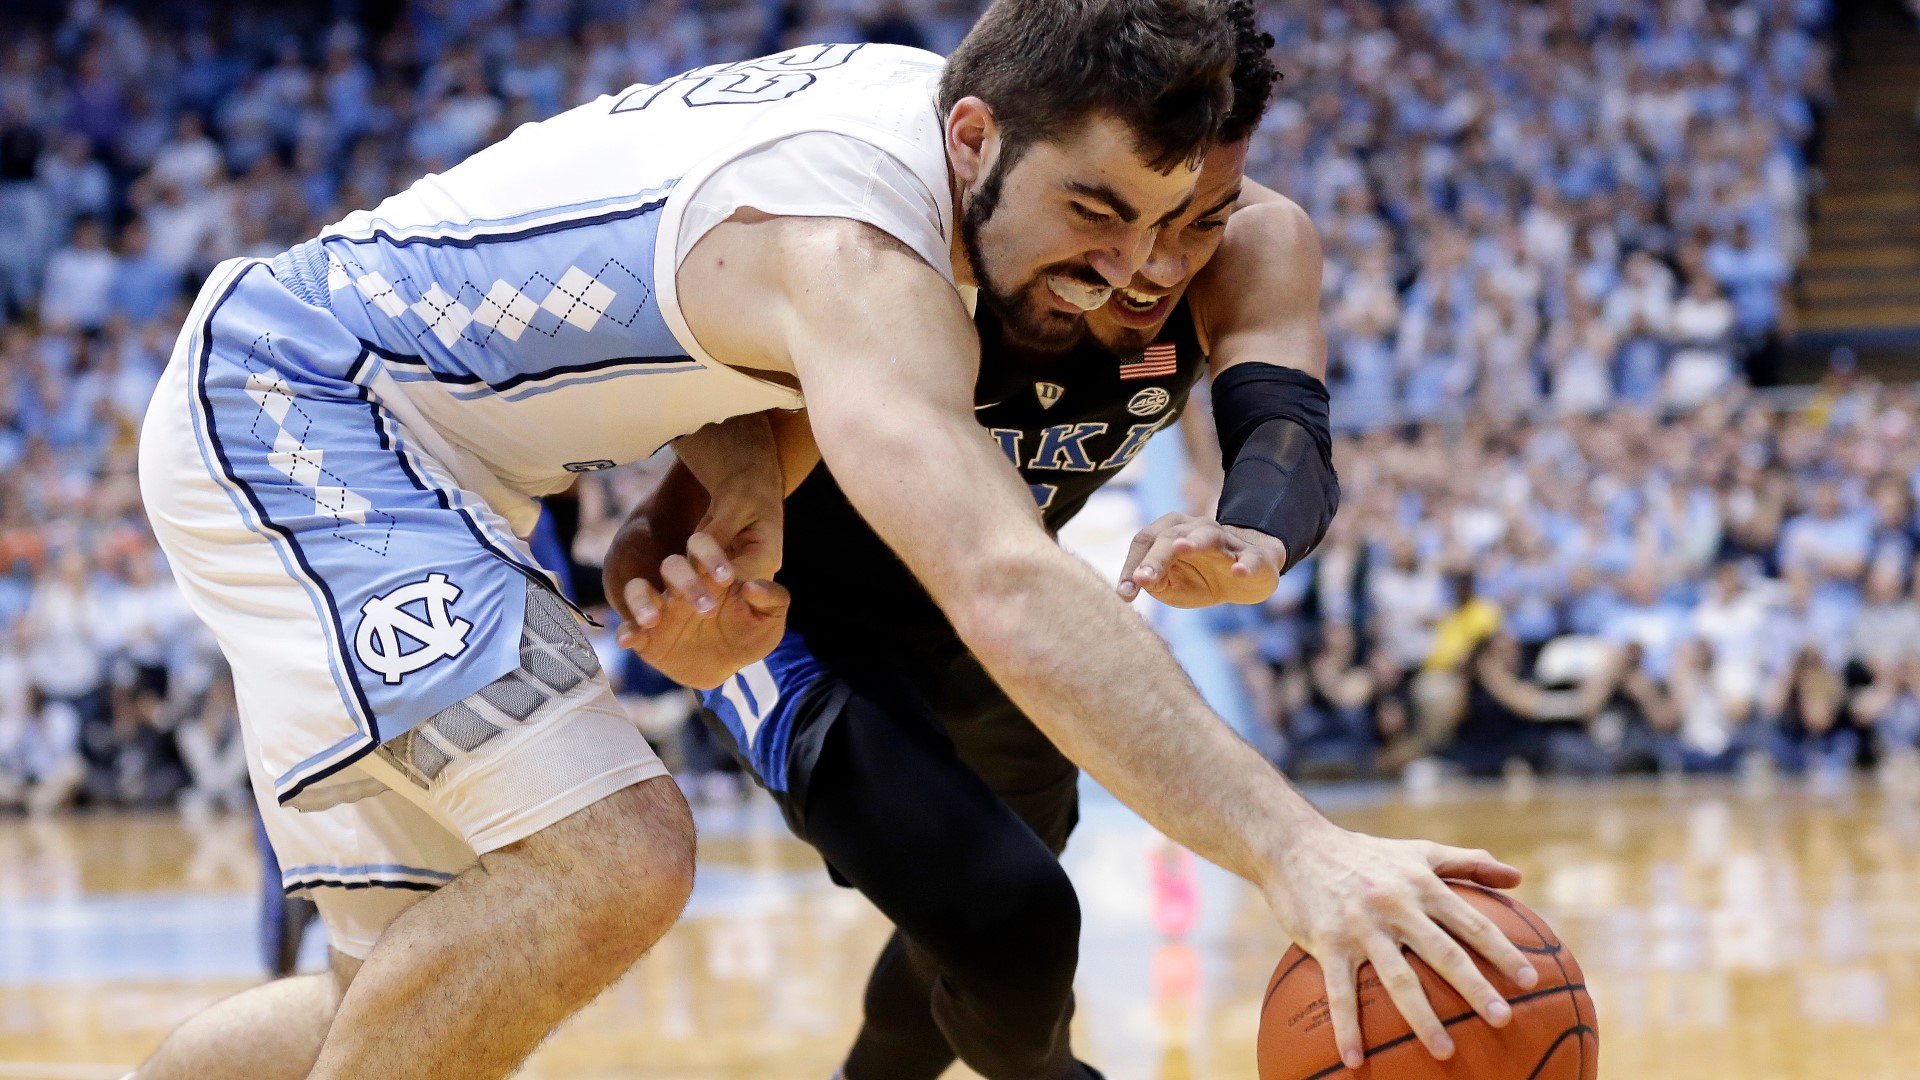 Fans have been waiting for the UNC and Duke men's basketball team to lace up in the Queen City Thursday. They are not playing against each other this game but if they win, they will square off Friday night.